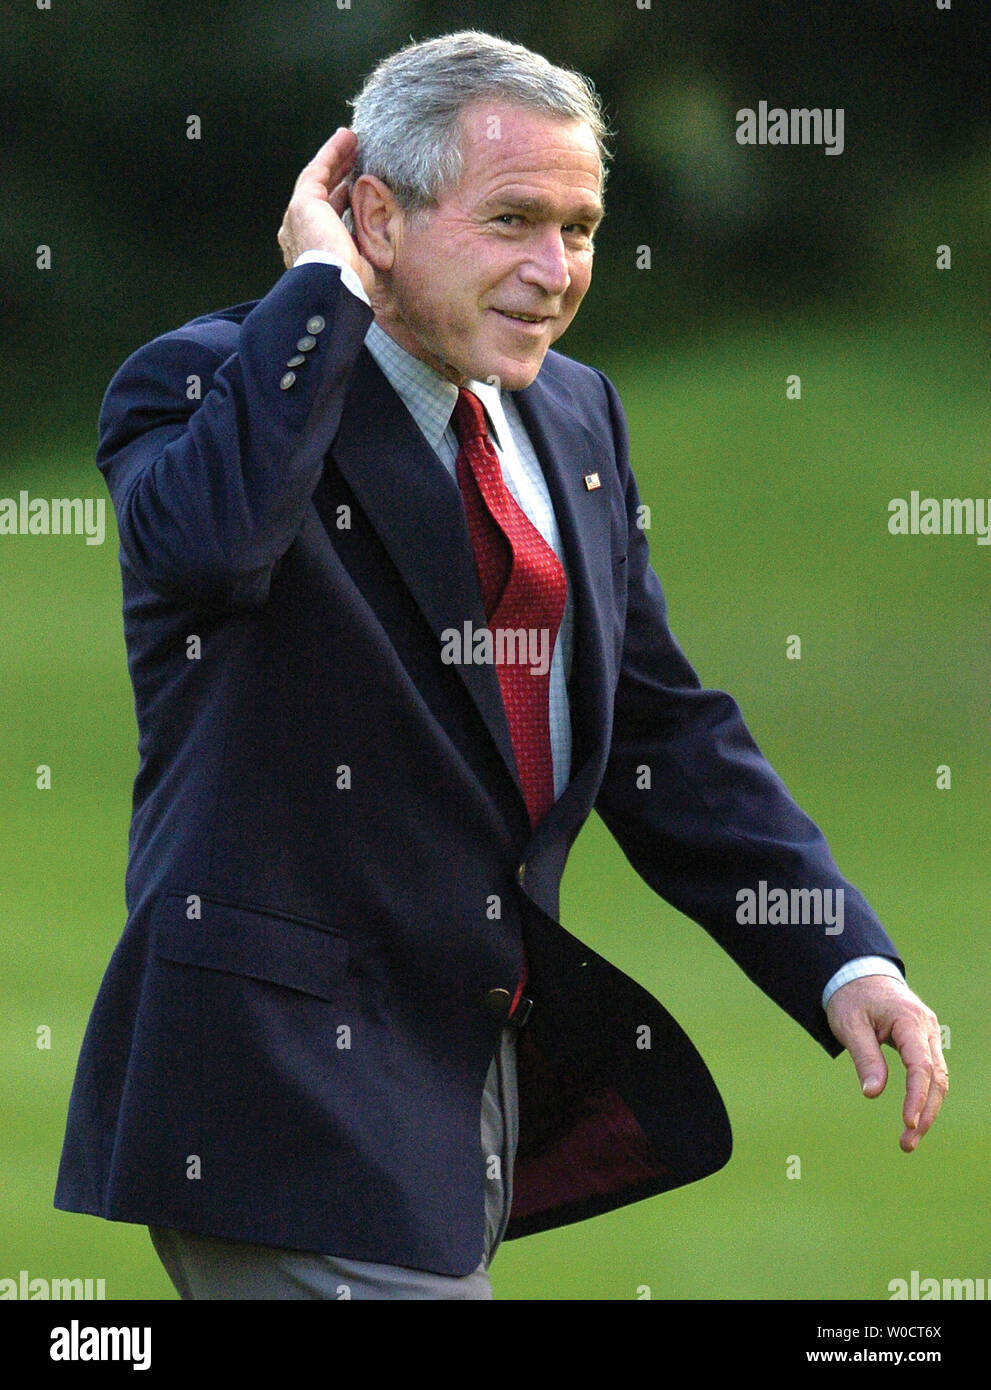 US President George W. Bush cups his ear to hear reporter's questions as he returns to the White House from a day trip to Florida to be briefed on relief efforts after Hurricane Wilma, October 27, 2005. Bush did not answer questions about Harriet Miers' decision to withdraw her Supreme Court nomination earlier in the day.    (UPI Photo/Mike Theiler) Stock Photo